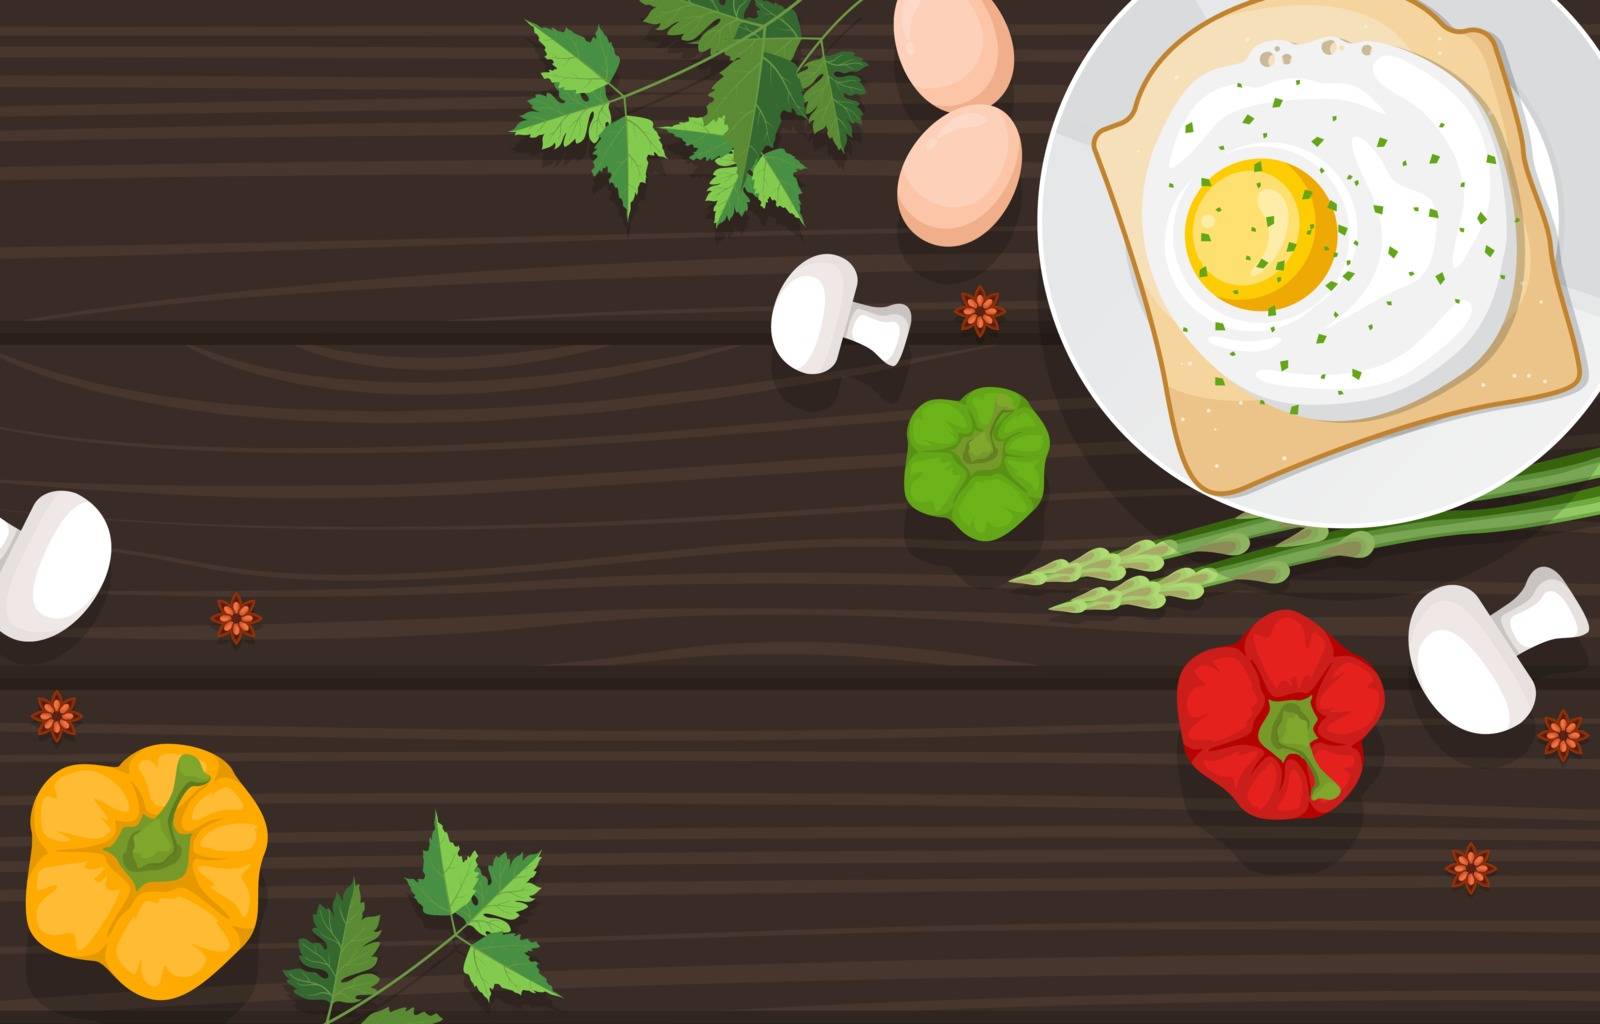 Eggs Bread Vegetables on Cooking Wooden Table Kitchen Backdrop Illustration